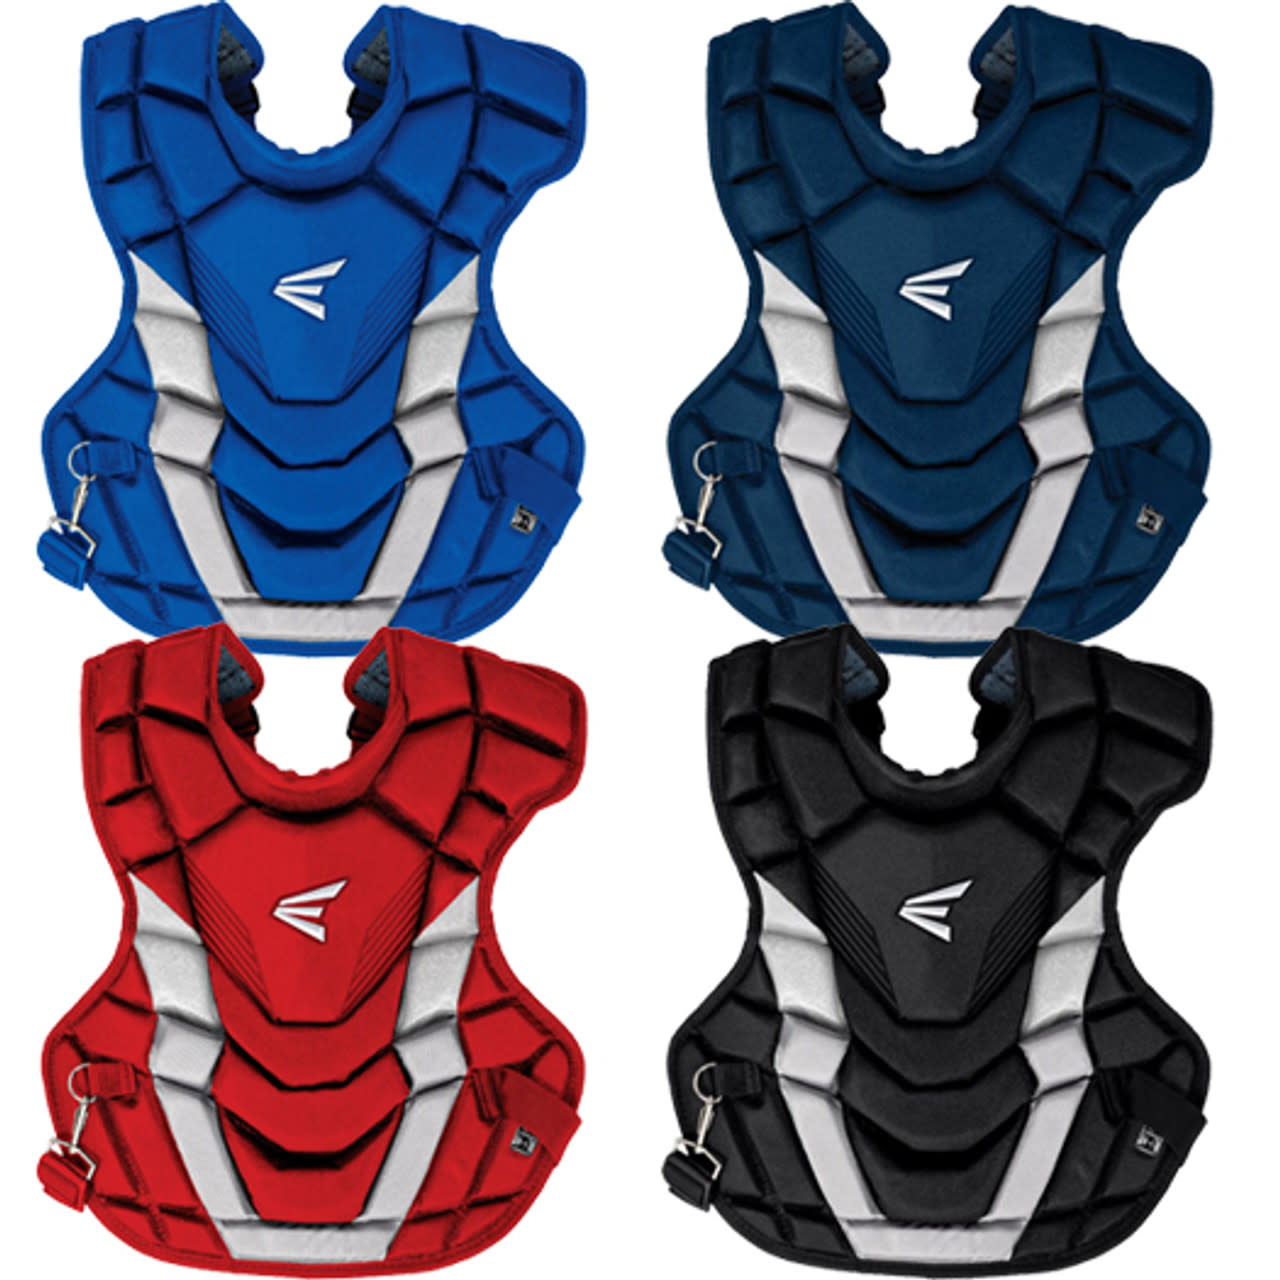 Easton Gametime Catcher youth chest protector